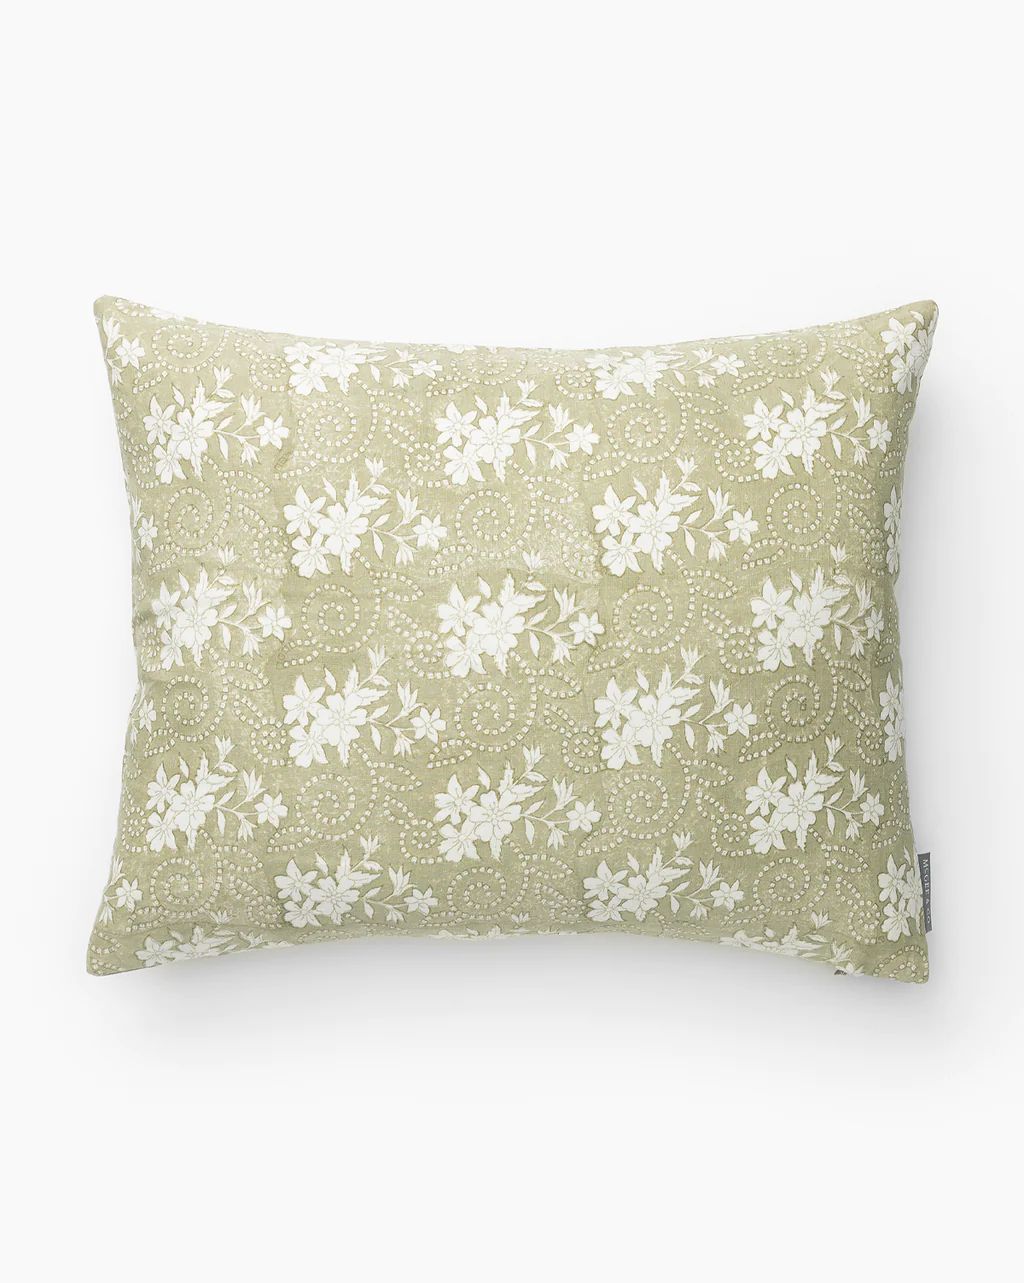 Francis Pillow Cover | McGee & Co.